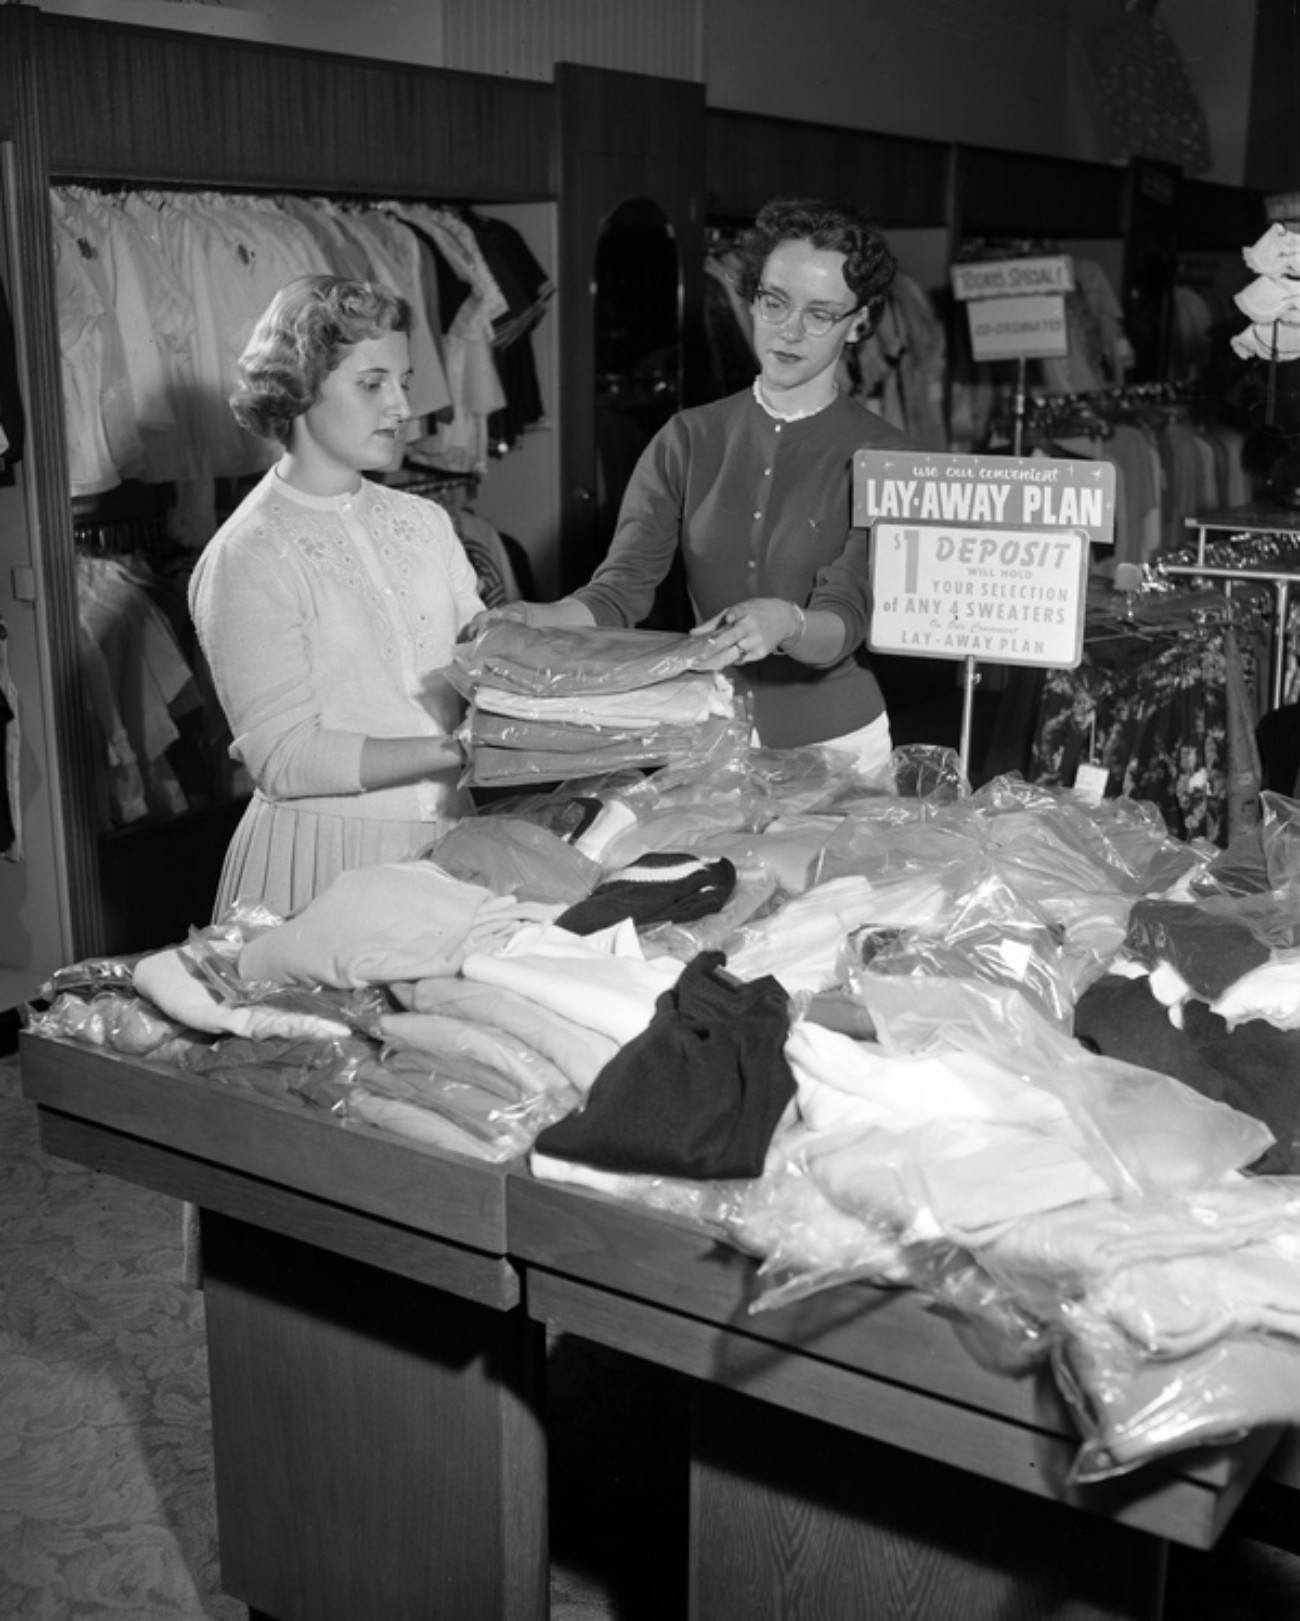 1950s women shopping for sweaters